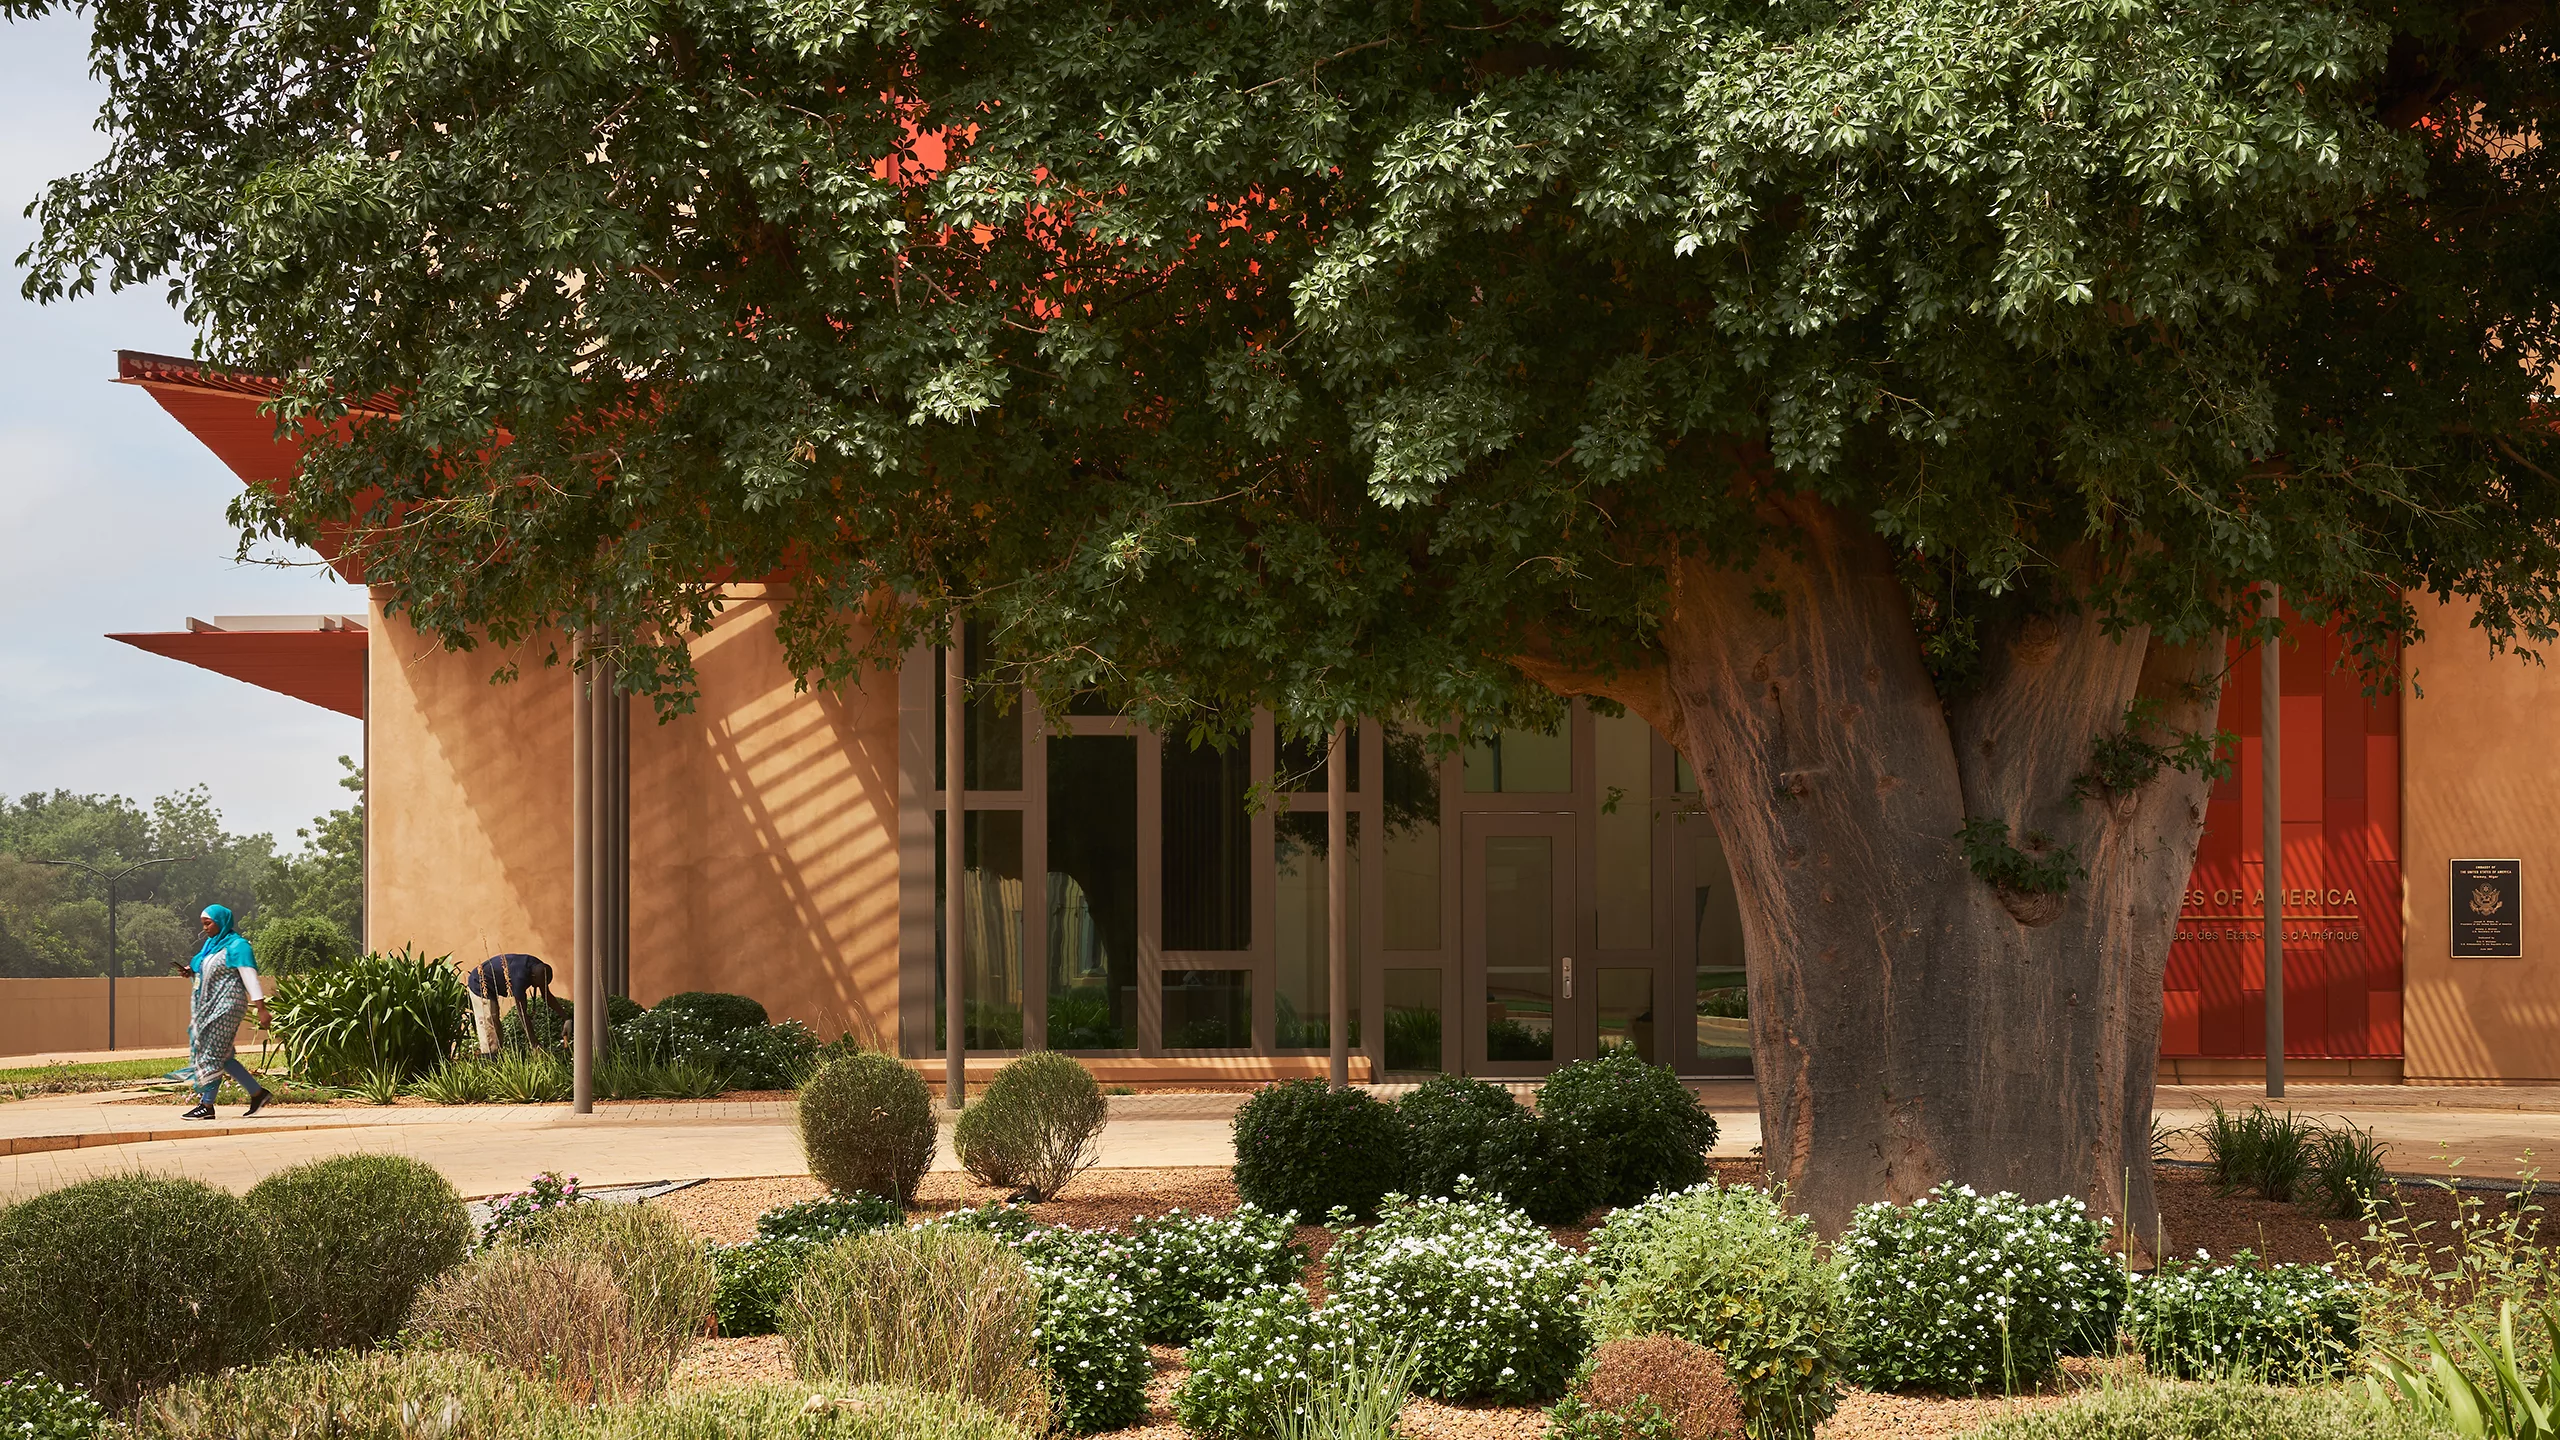 Exterior daylight view of the landscaped entrance to the U.S. embassy in Niamey with a large tree in front and one person leaving the building